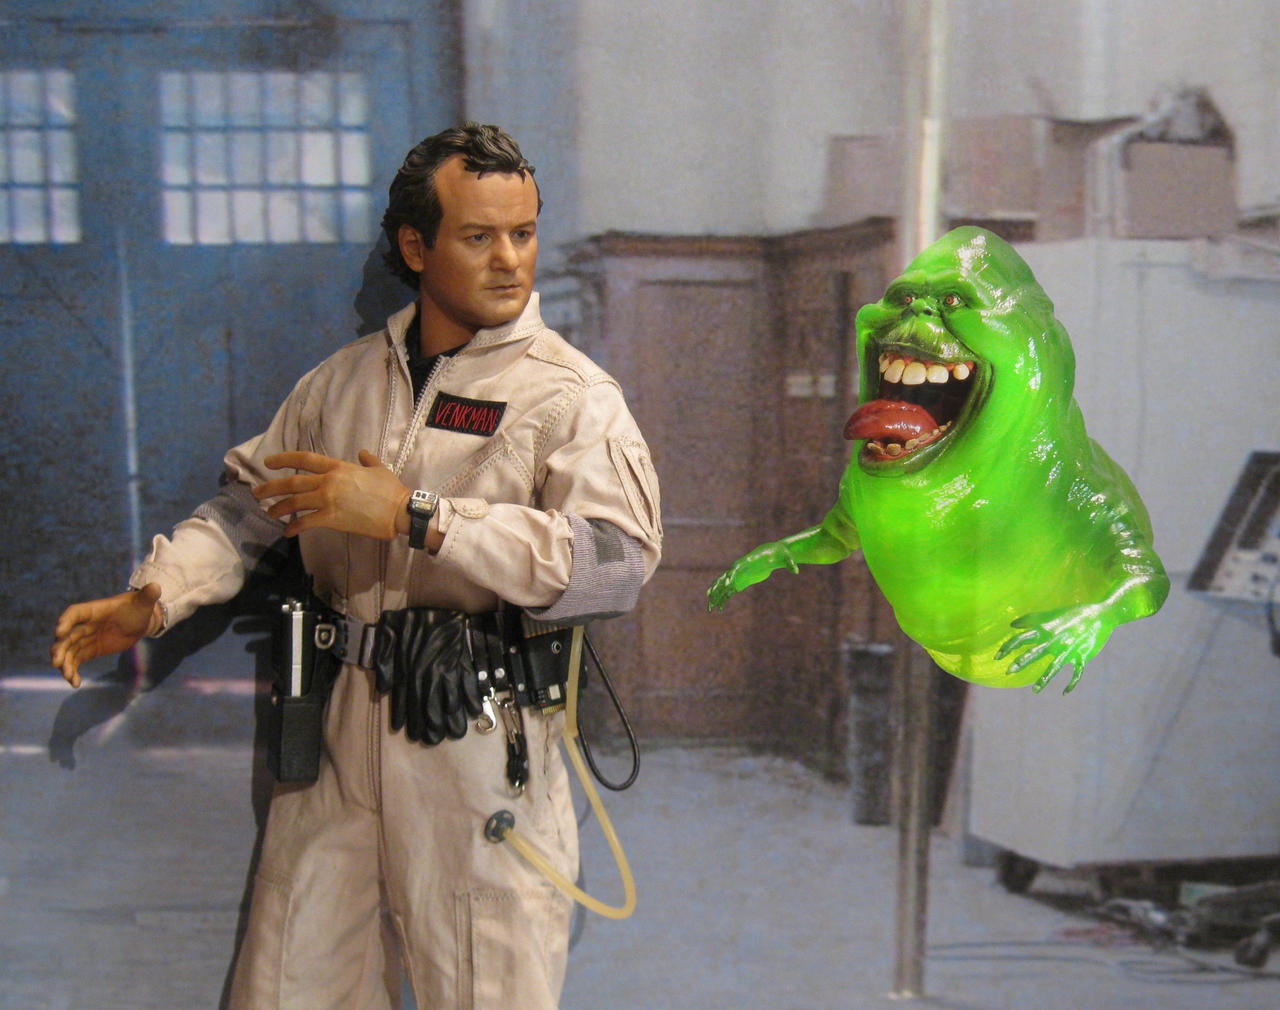 ghostbusters_love_hate_relationship_by_thedollknight-dc2j9gm.jpg